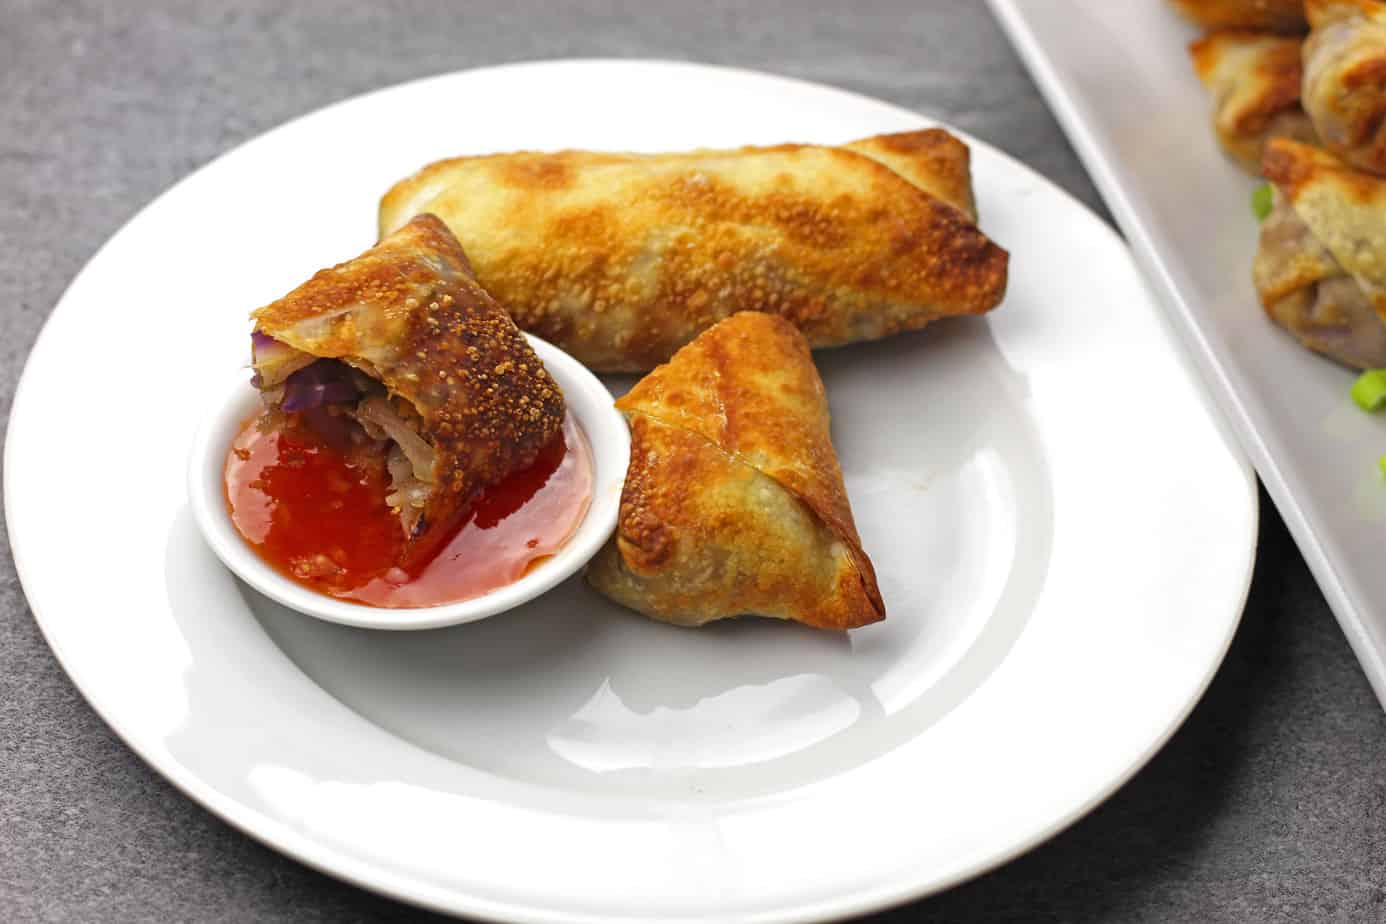 Egg roll broken and dipped into sauce